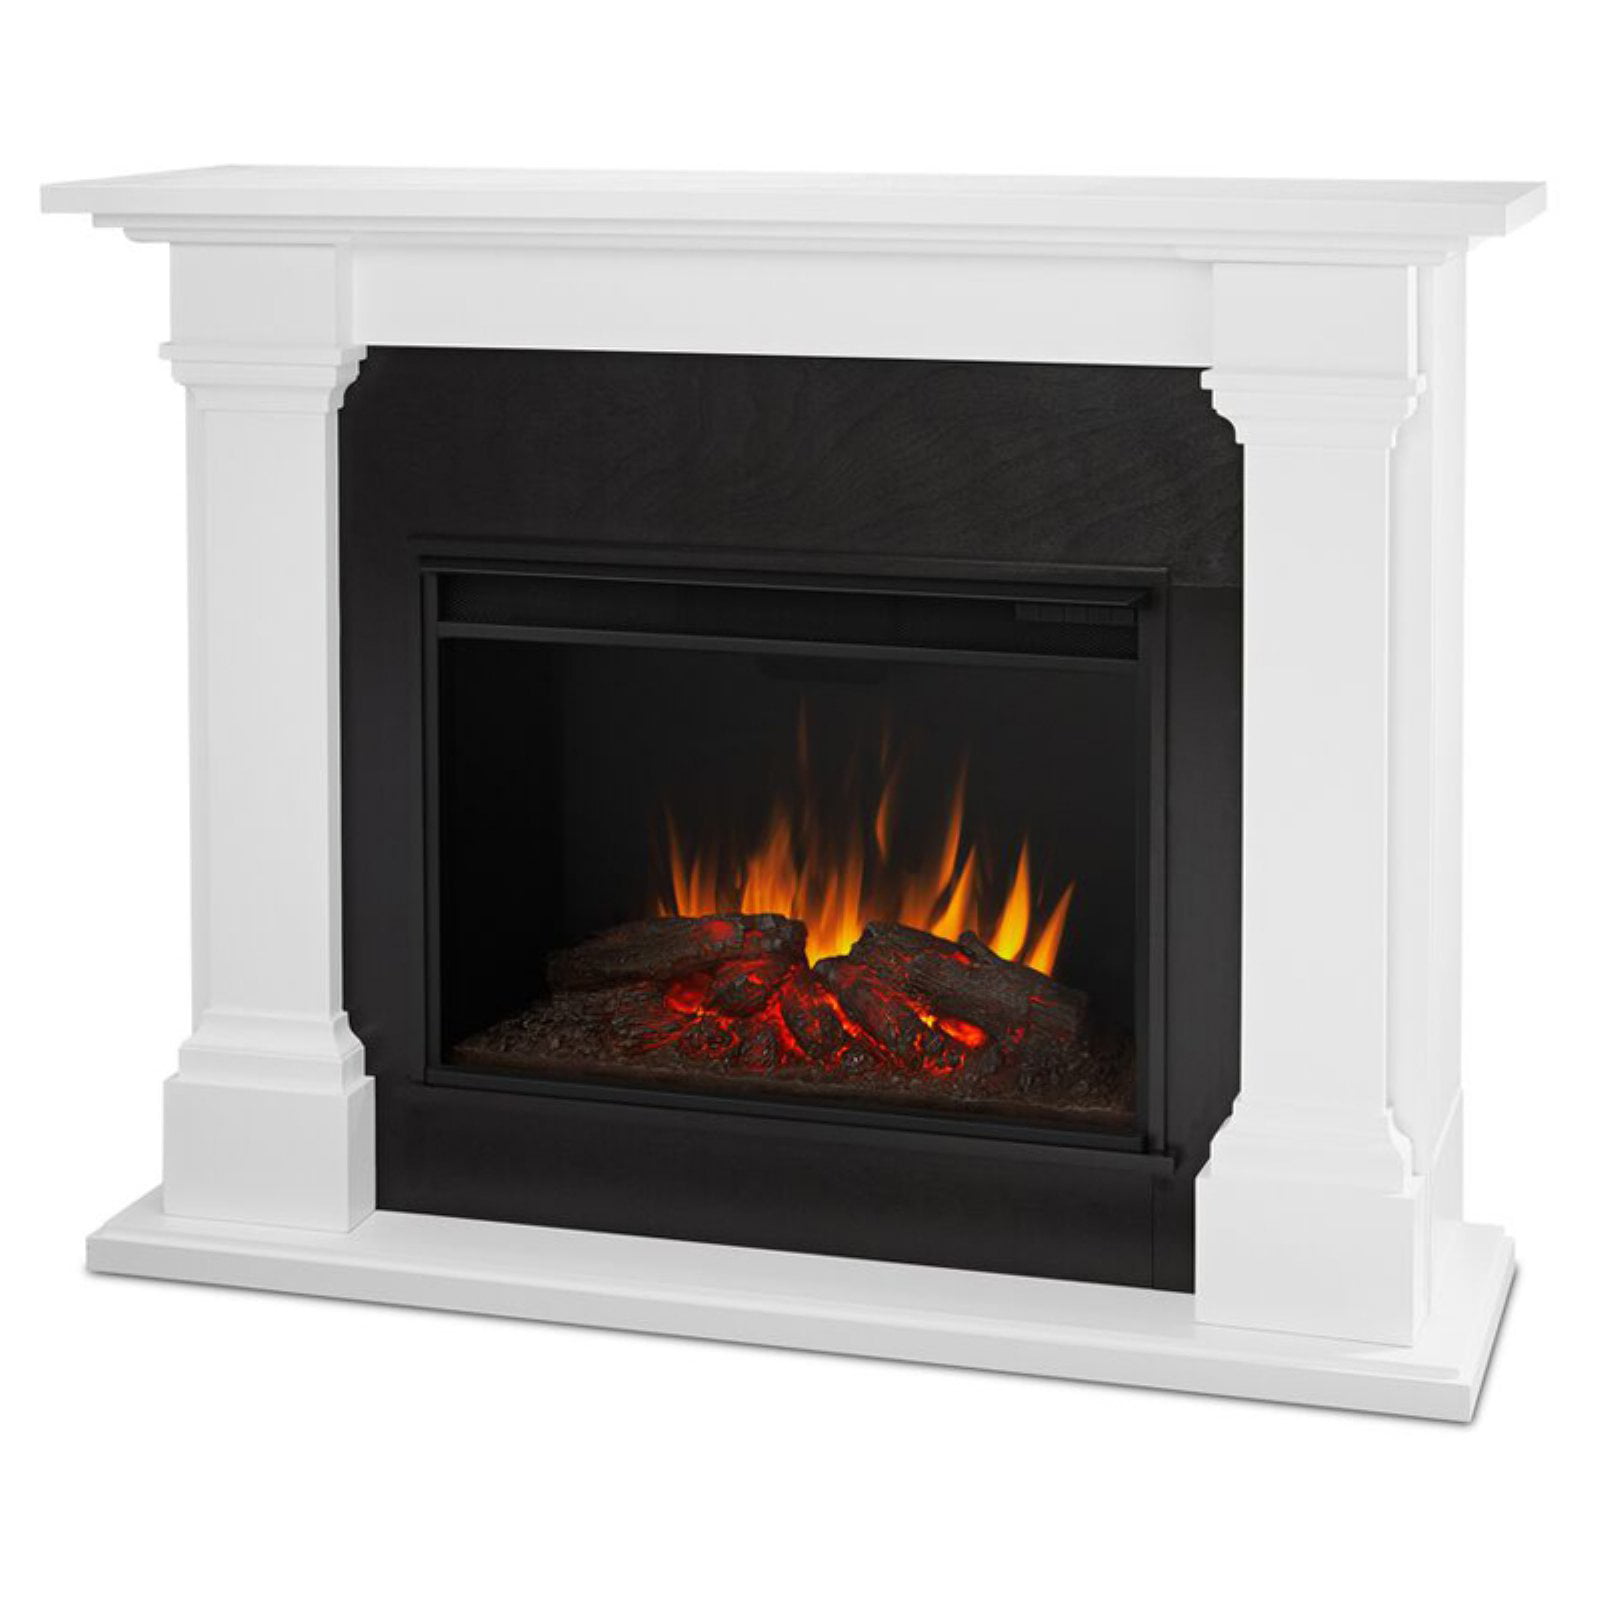 callaway-grand-electric-fireplace-in-white-by-real-flame-walmart